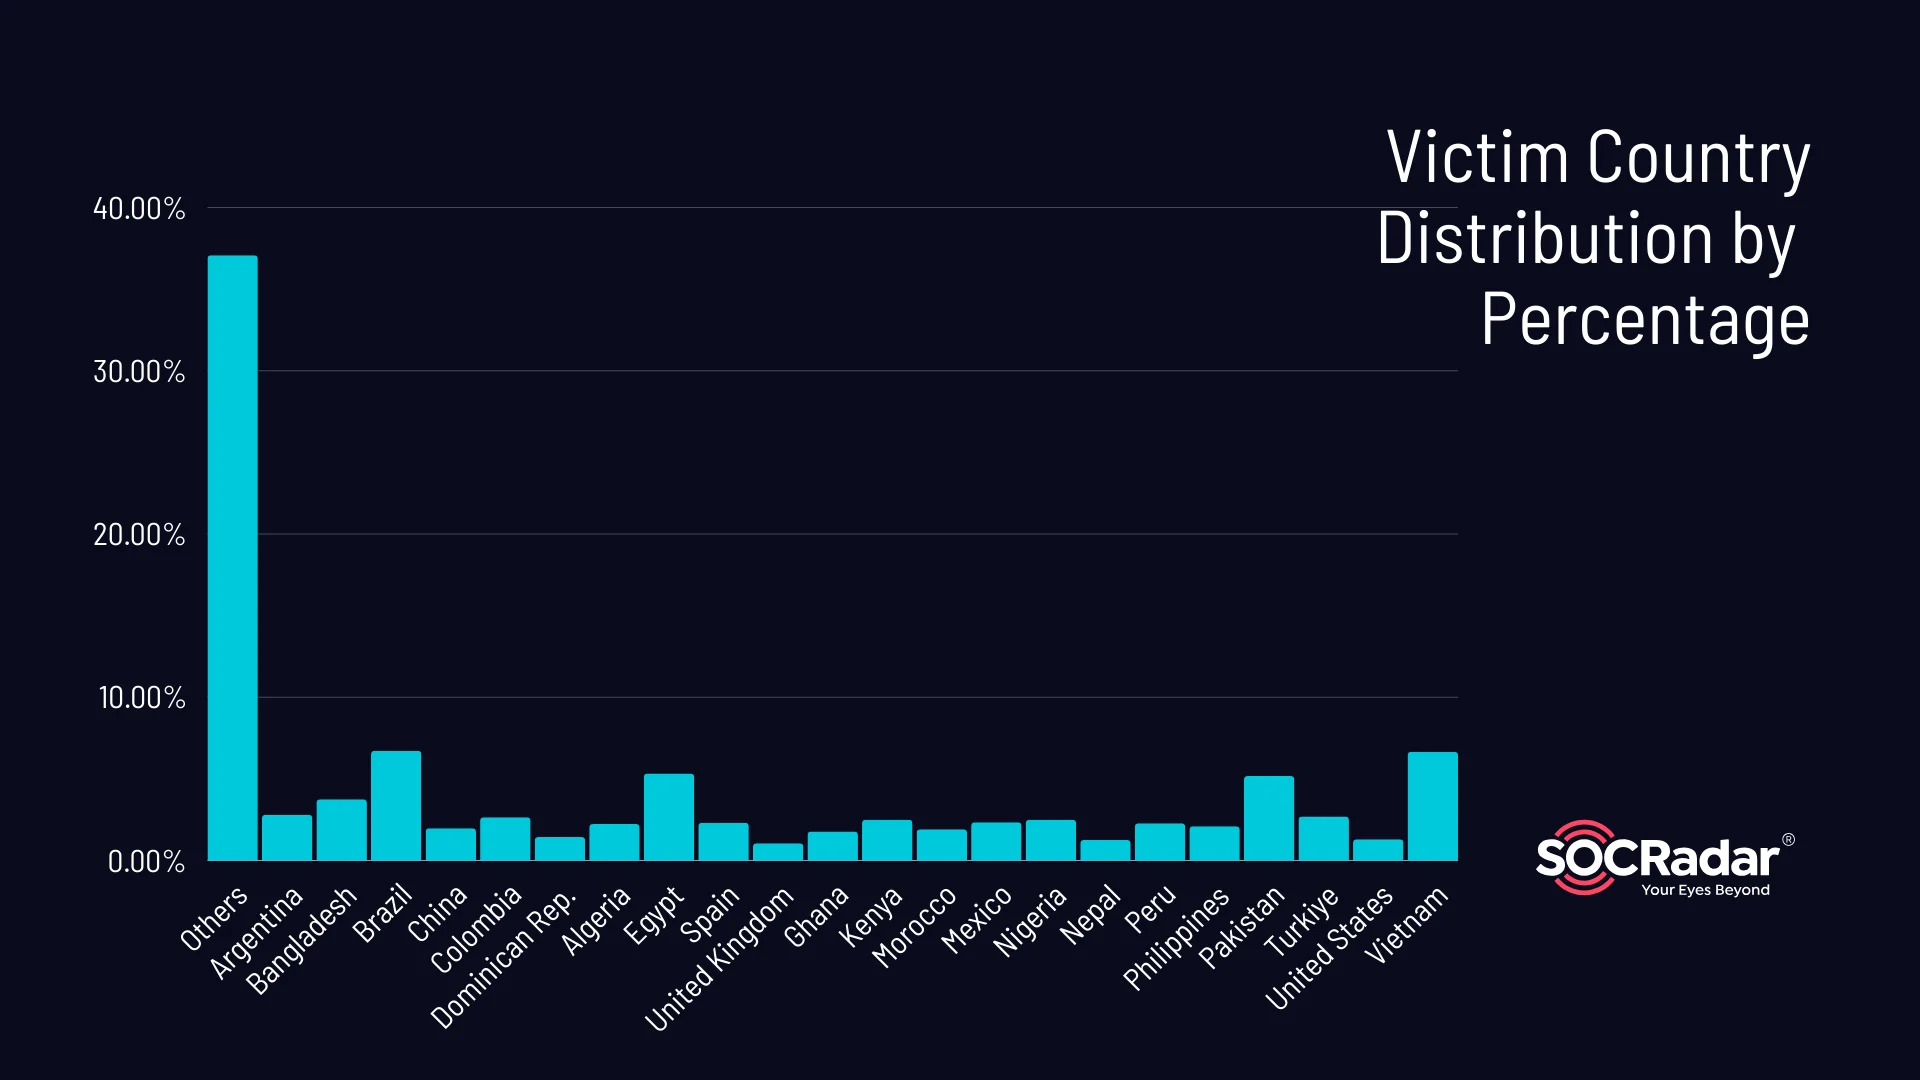 Victim country distribution by percentage